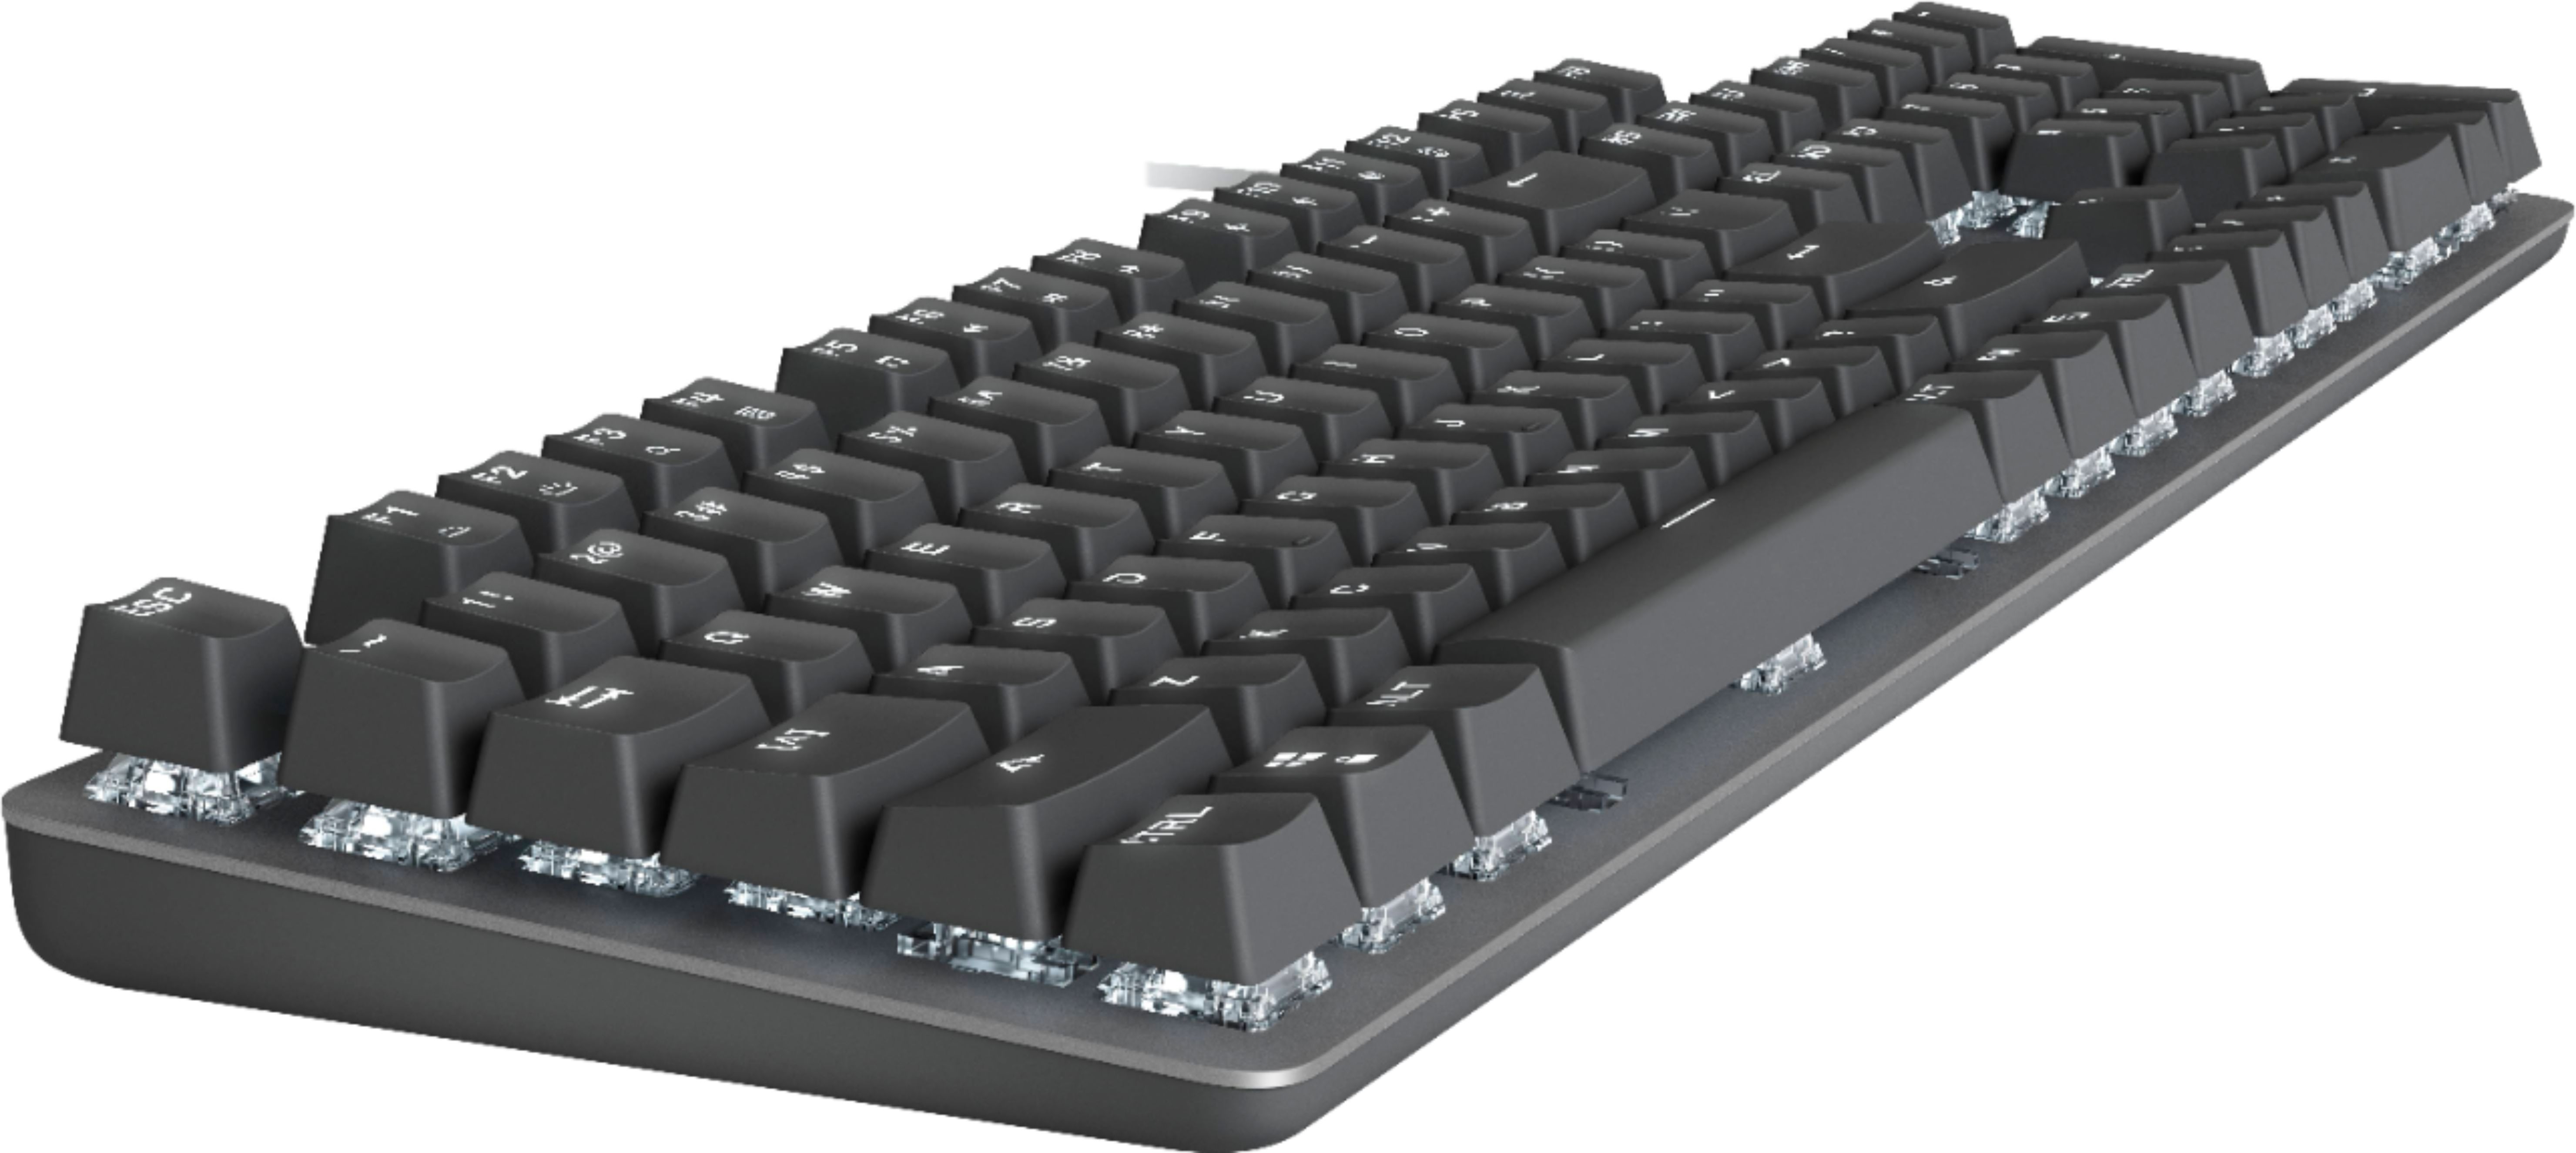 Angle View: Logitech - K845 Full-size Wired Mechanical Cherry MX Red Linear Switch Keyboard with Five Backlight Modes - Graphite